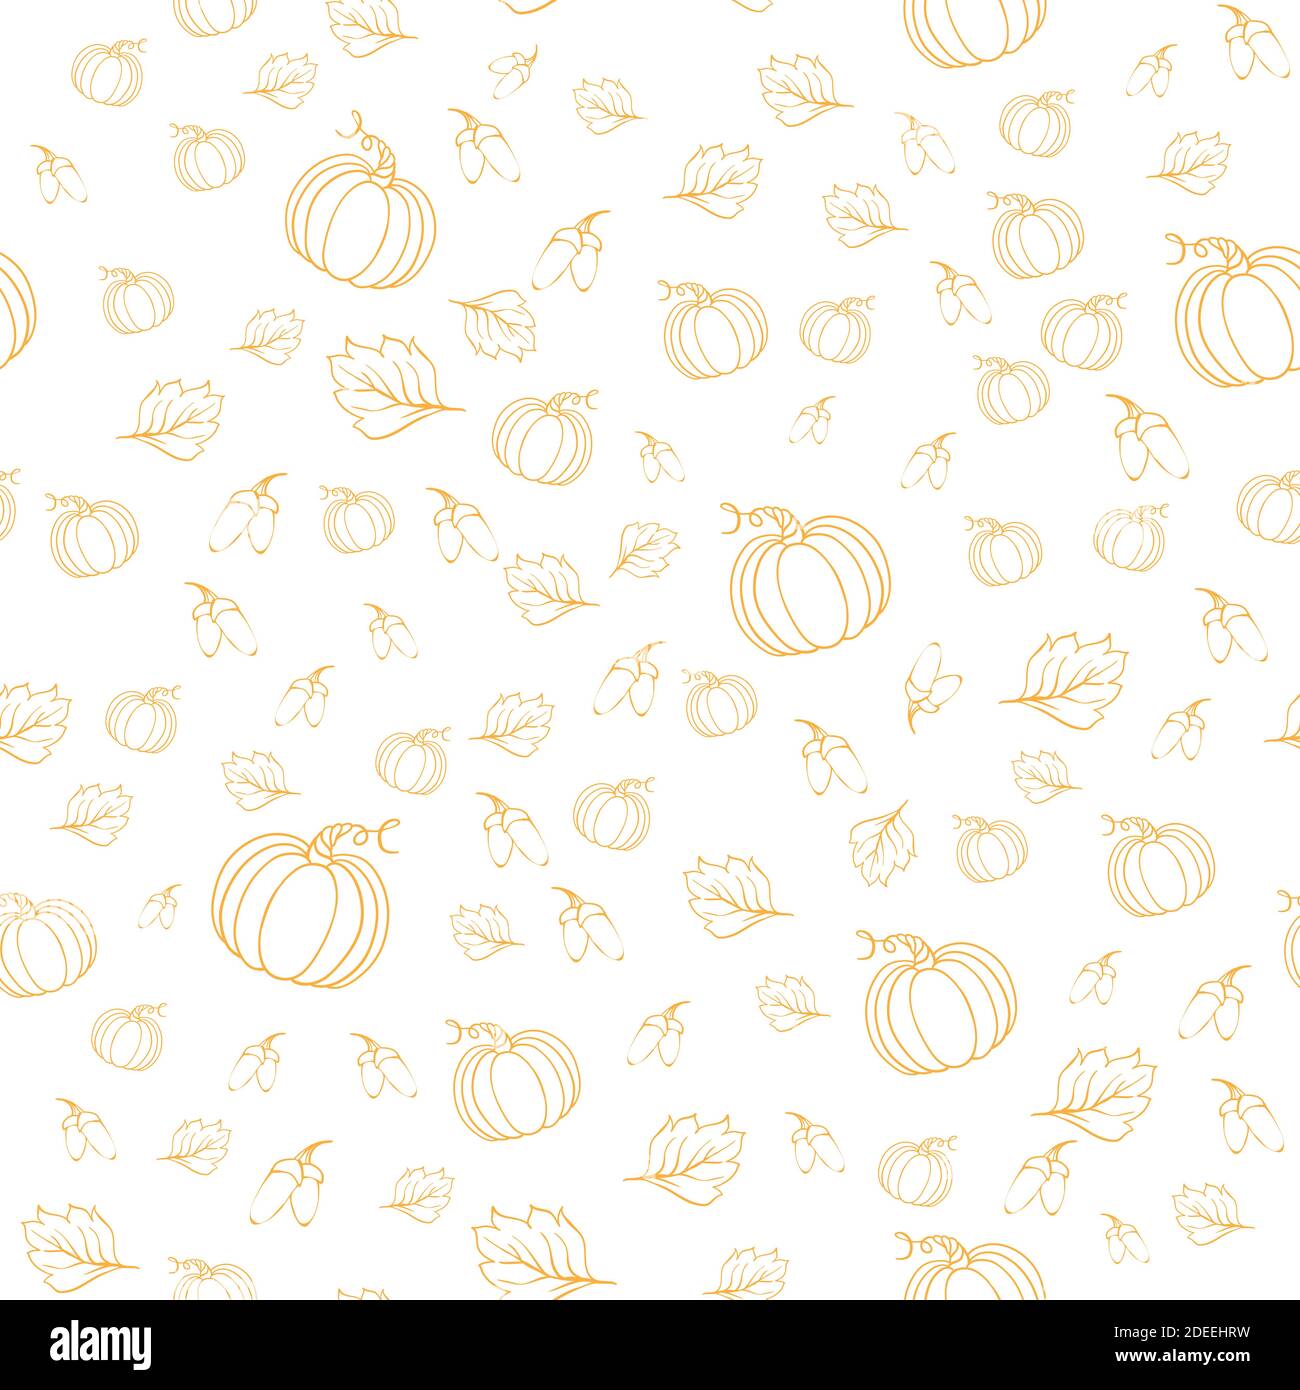 Seamless vector pattern, hand drawn floral background. Halloween collection. Stock Vector